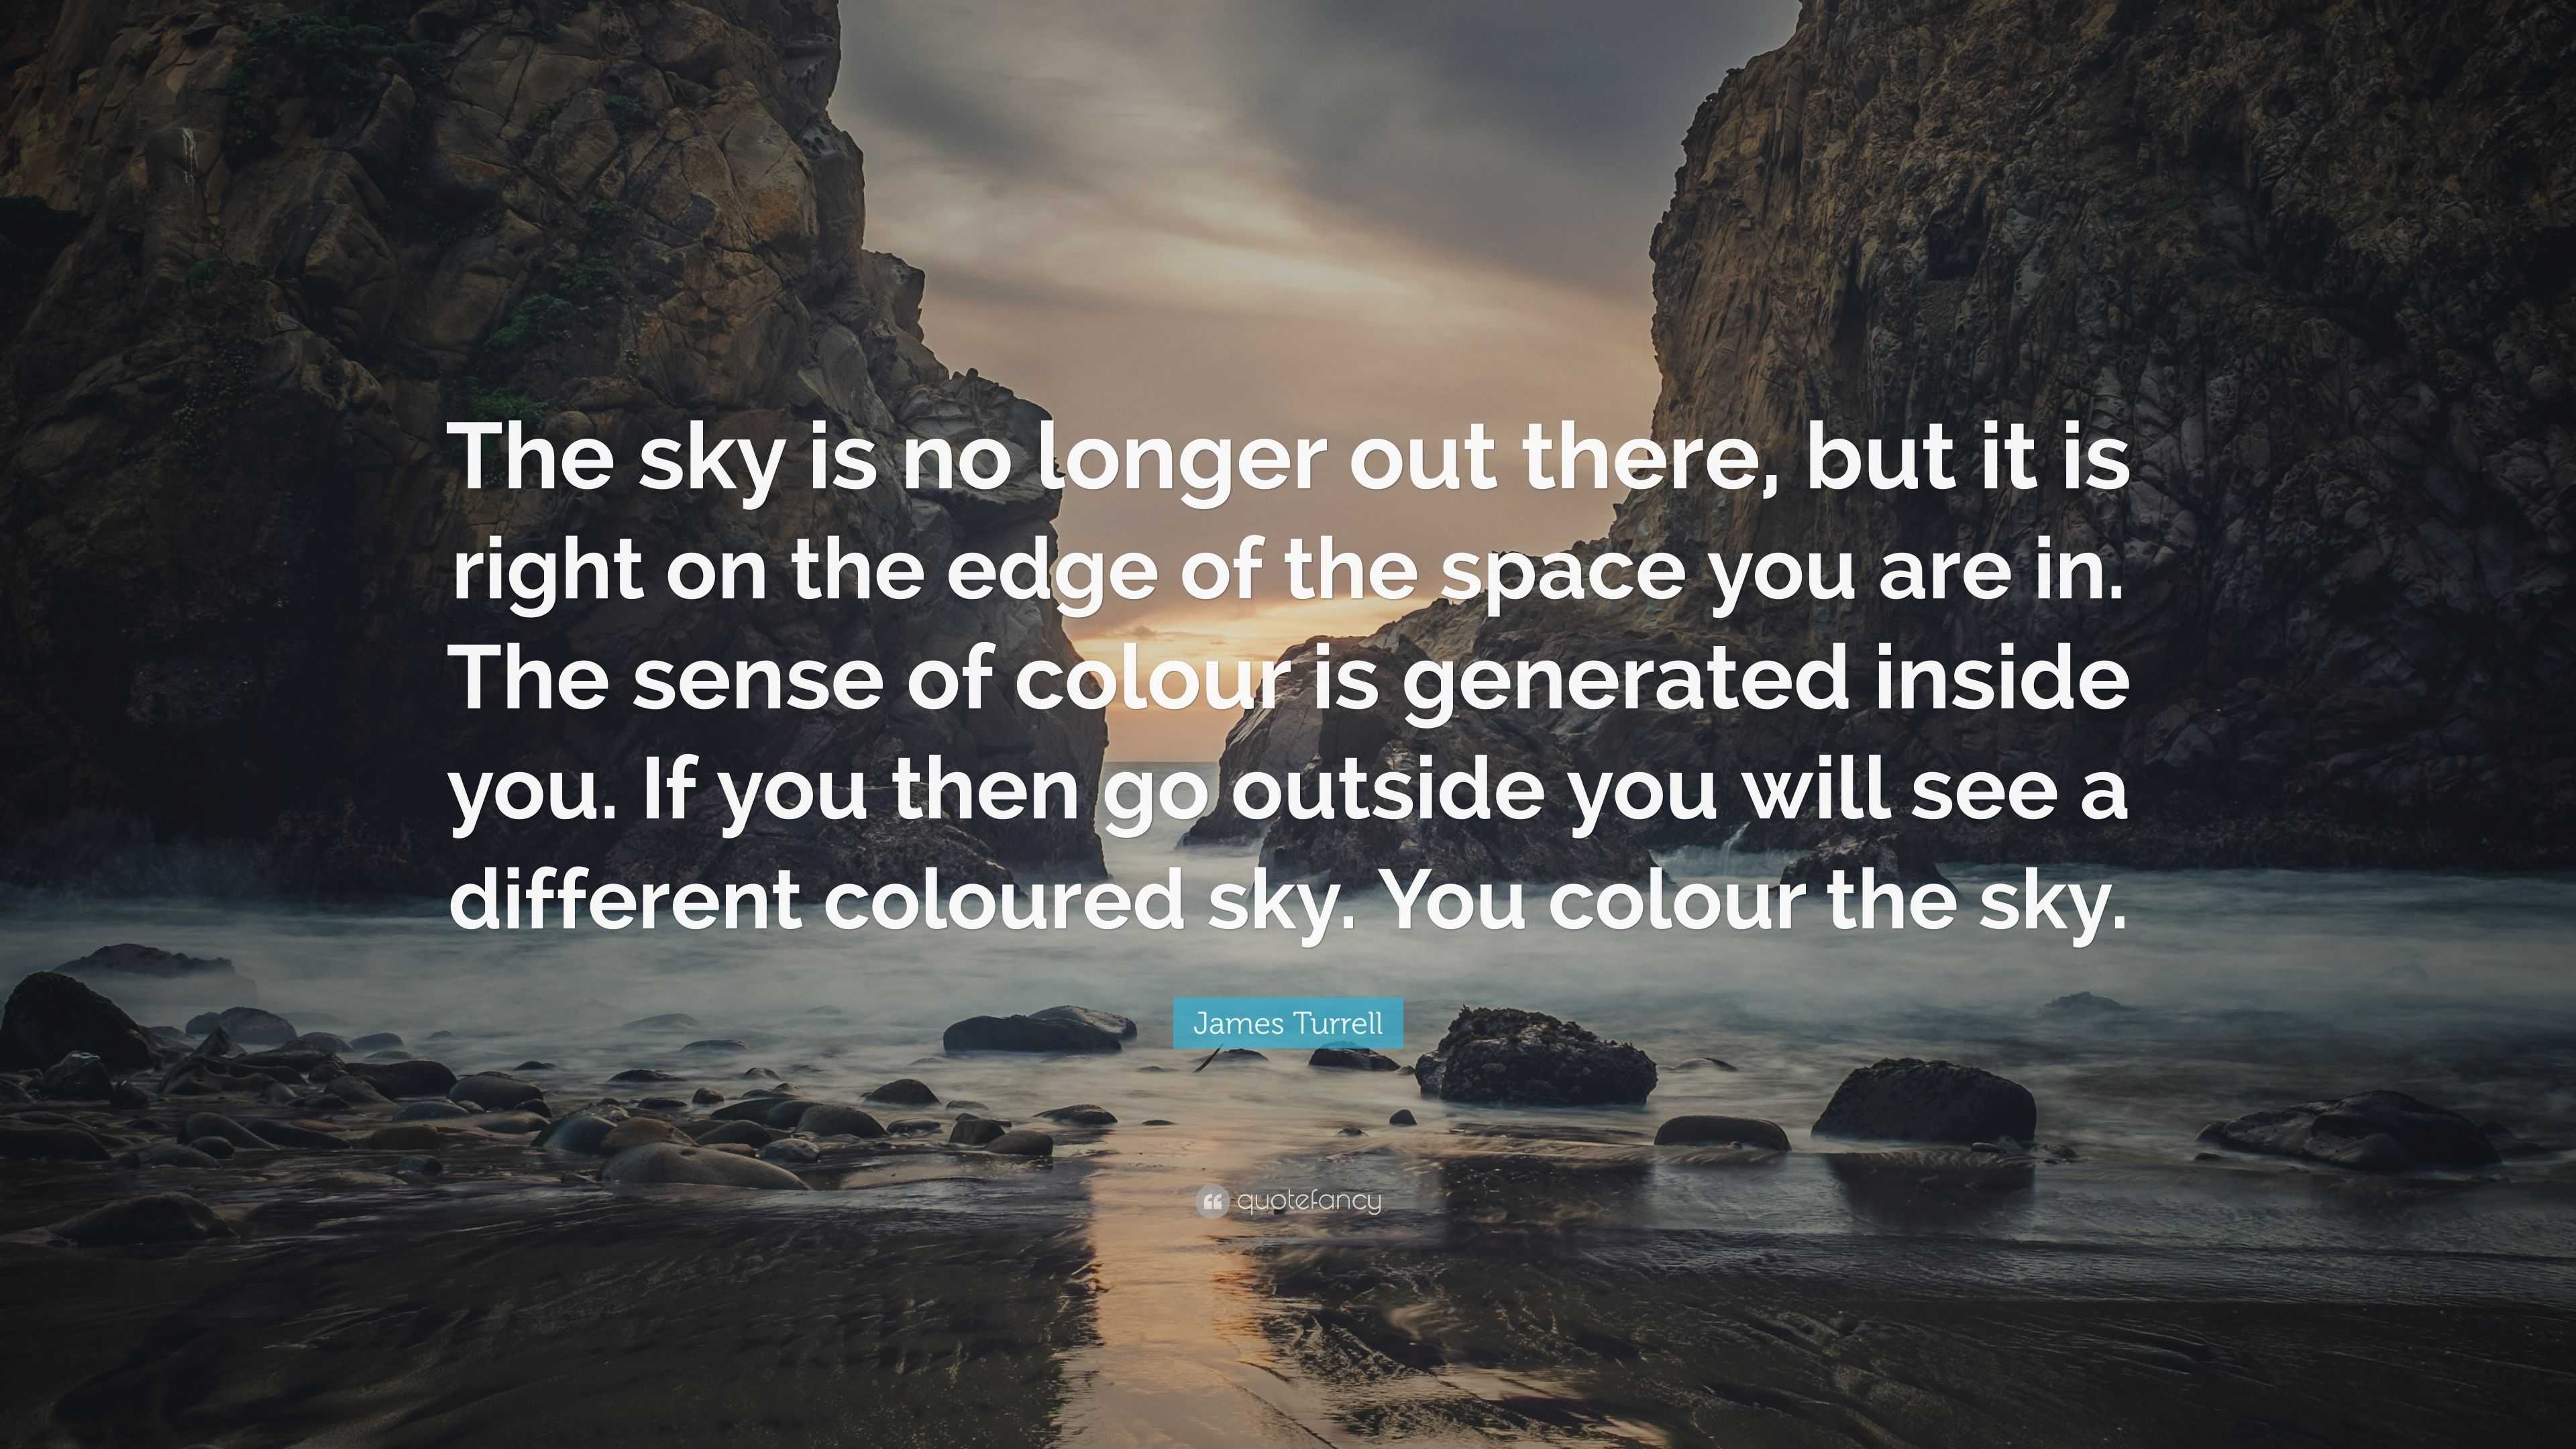 James Turrell Quote: "The sky is no longer out there, but it is right on the edge of the space ...